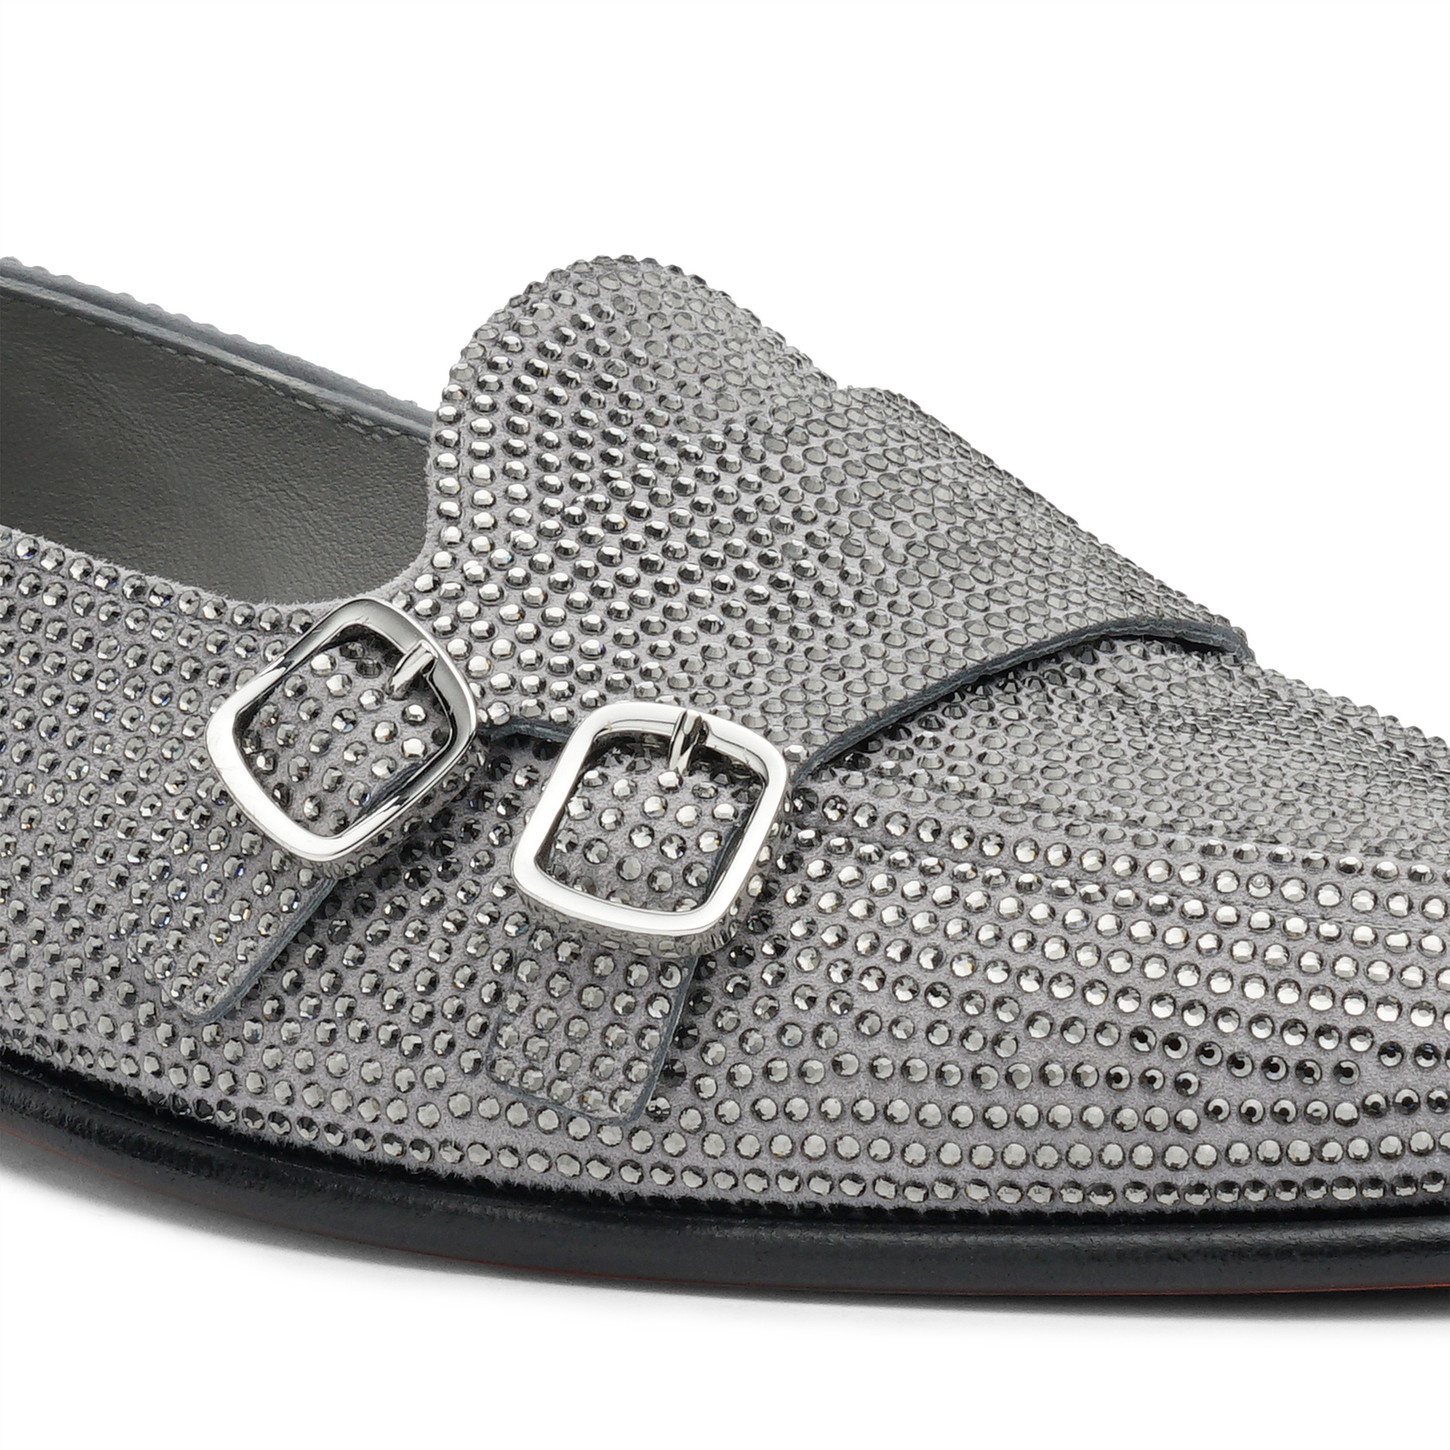 Women's silver strass Andrea double-buckle loafer - 6